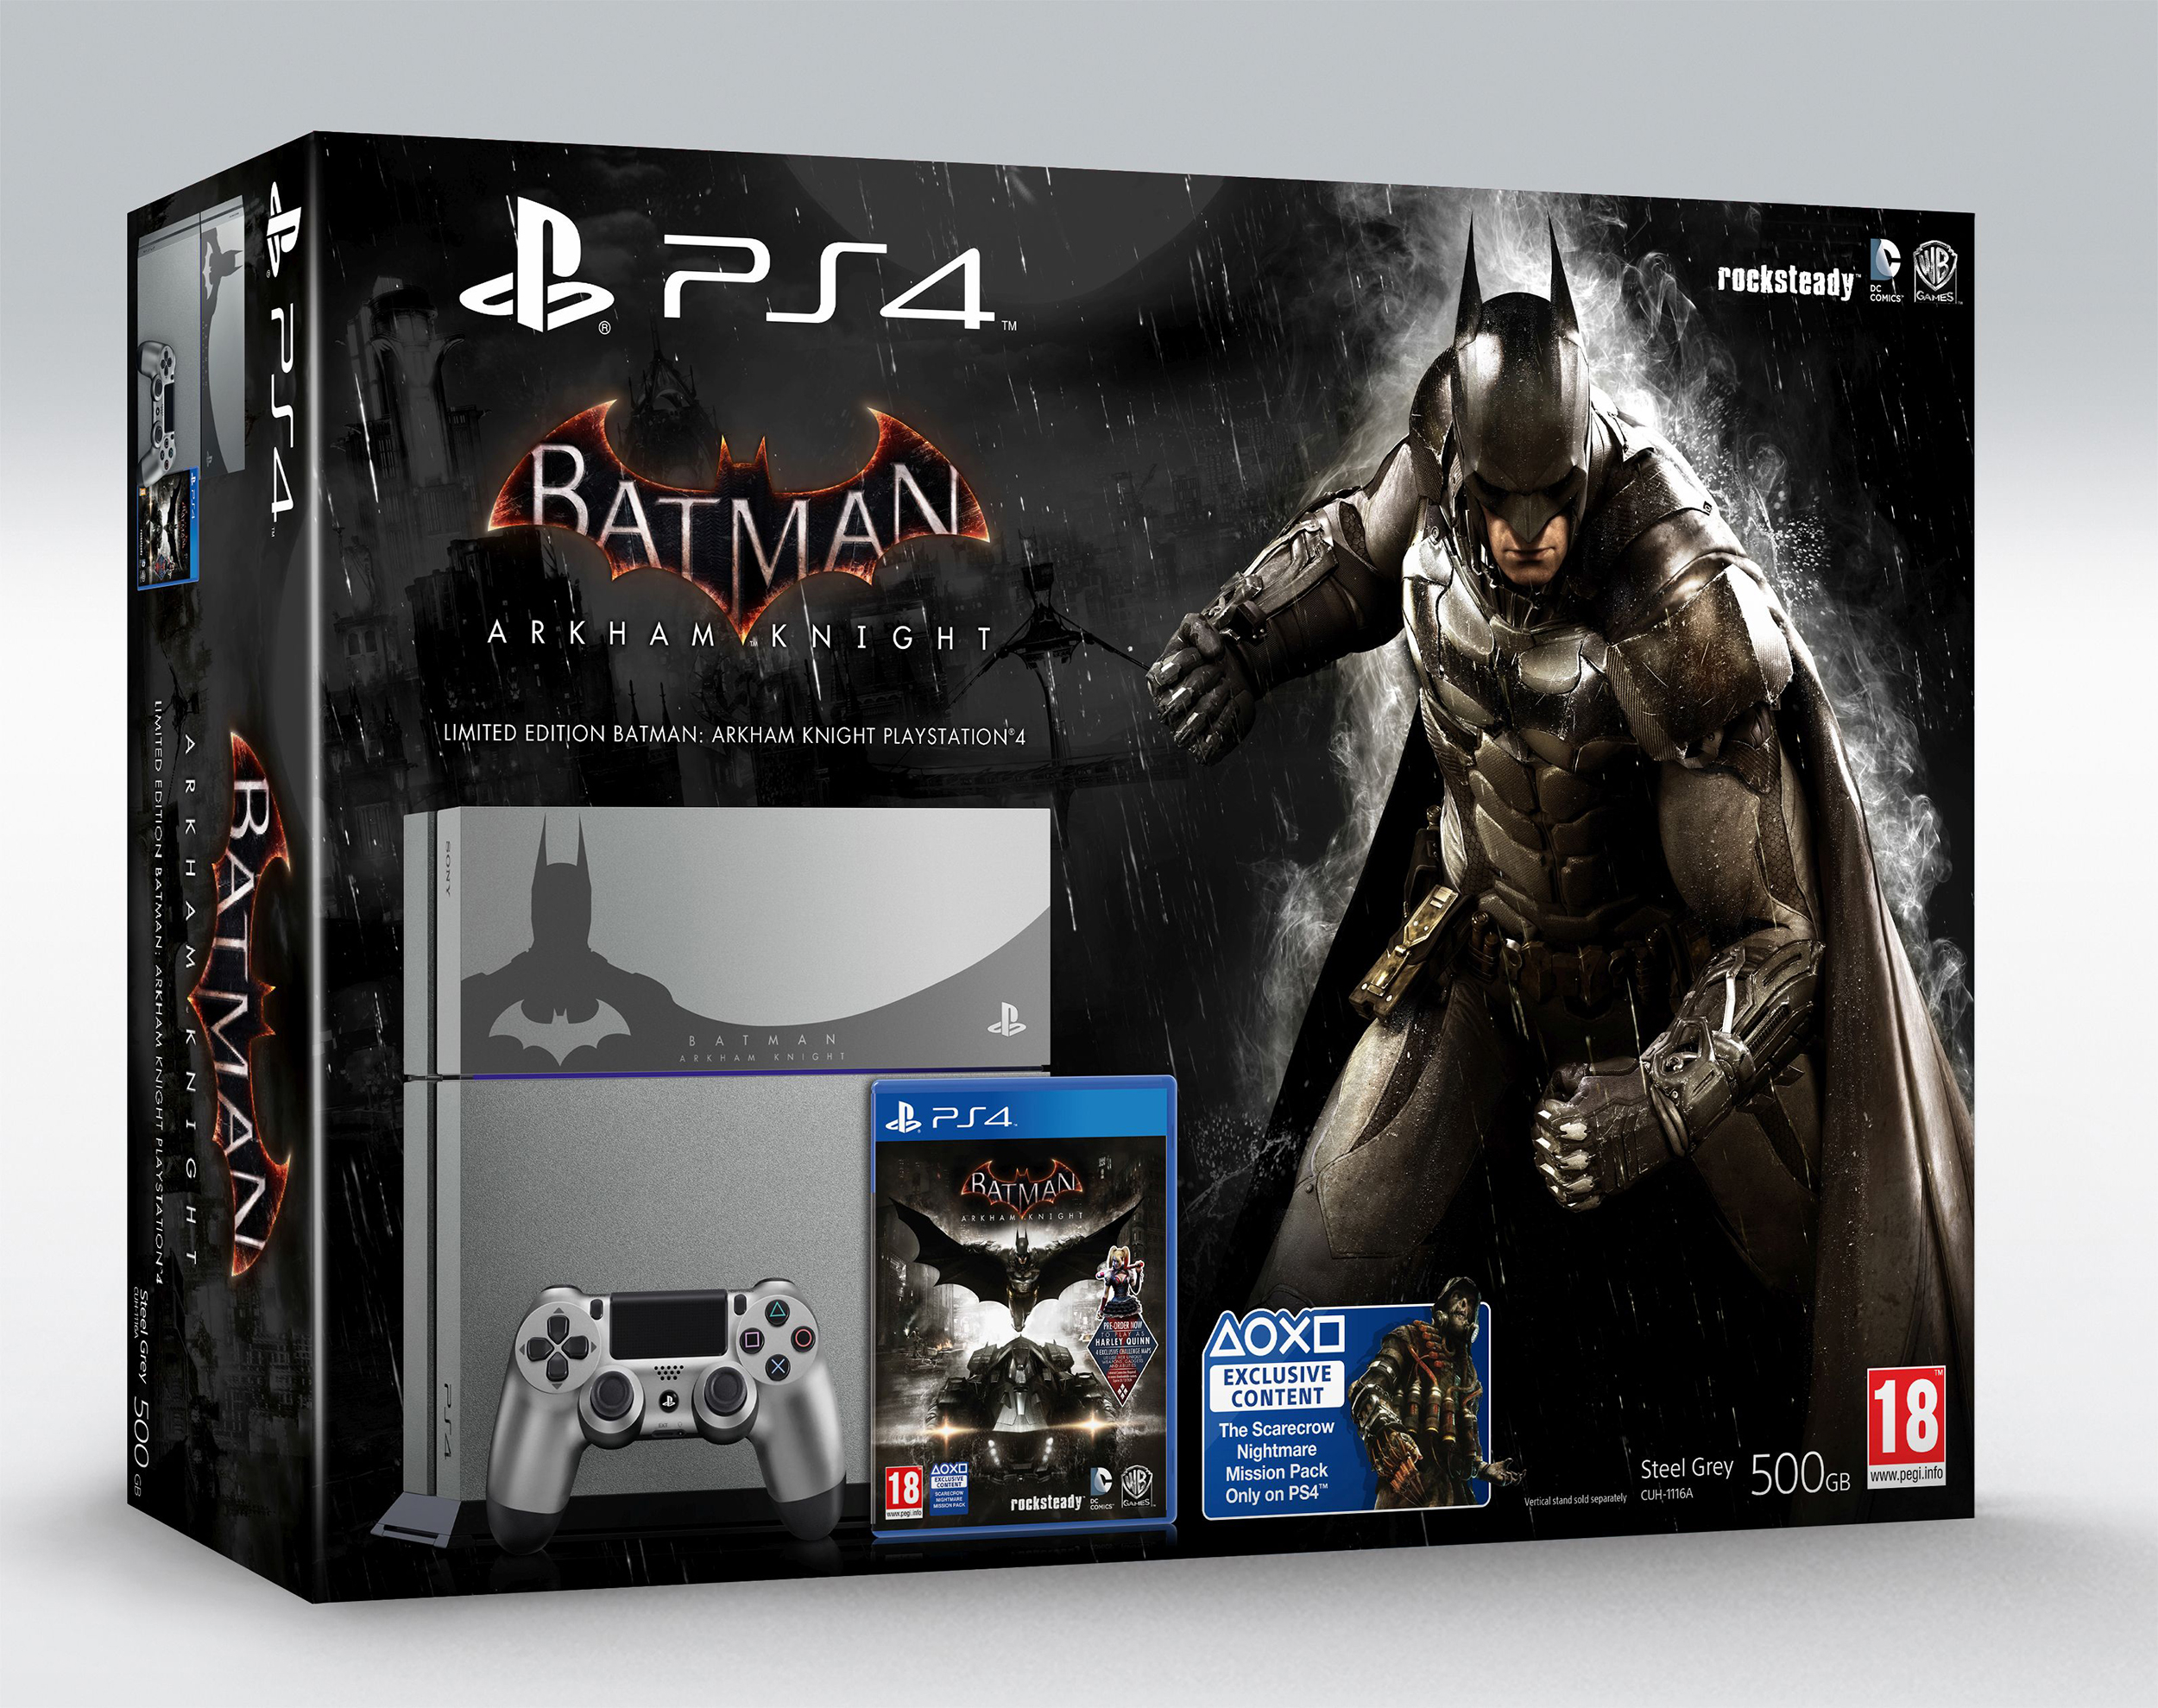 Batman: Arkham Knight PlayStation 4 Limited Edition unveiled, plans for PS4  exclusive Scarecrow DLC - Neoseeker